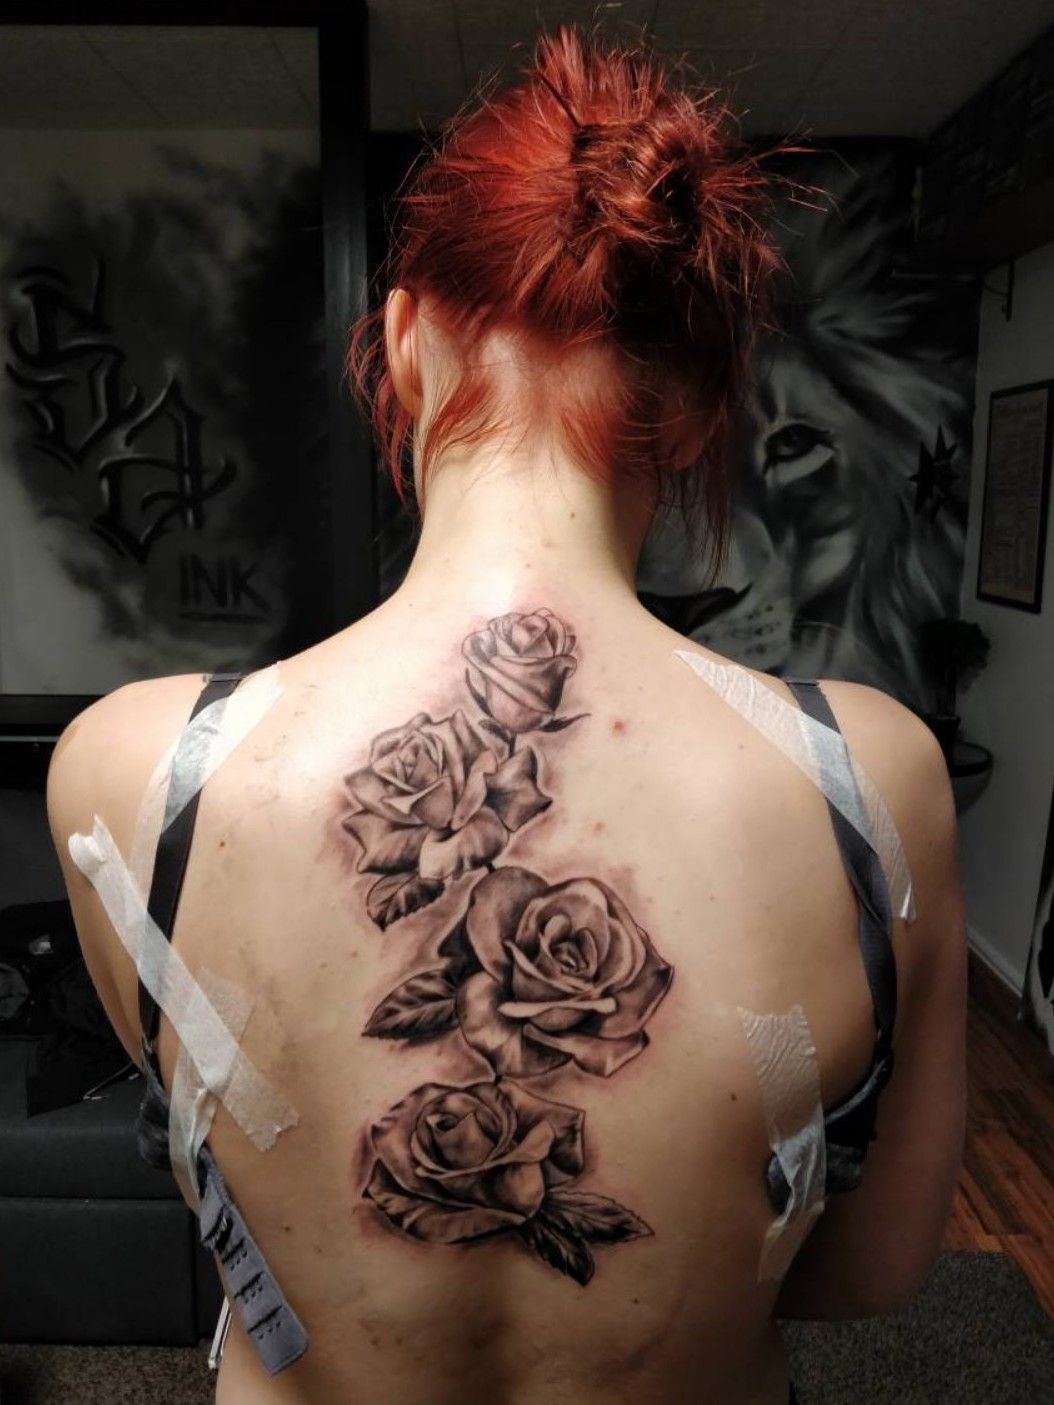 My Tattoo Work on Tumblr: Snake and rose for the other day. Thanks Kim # tattoo #snaketattoo #rosetattoo #snakeandrosetattoo #backtattoo  #colourtattoo...